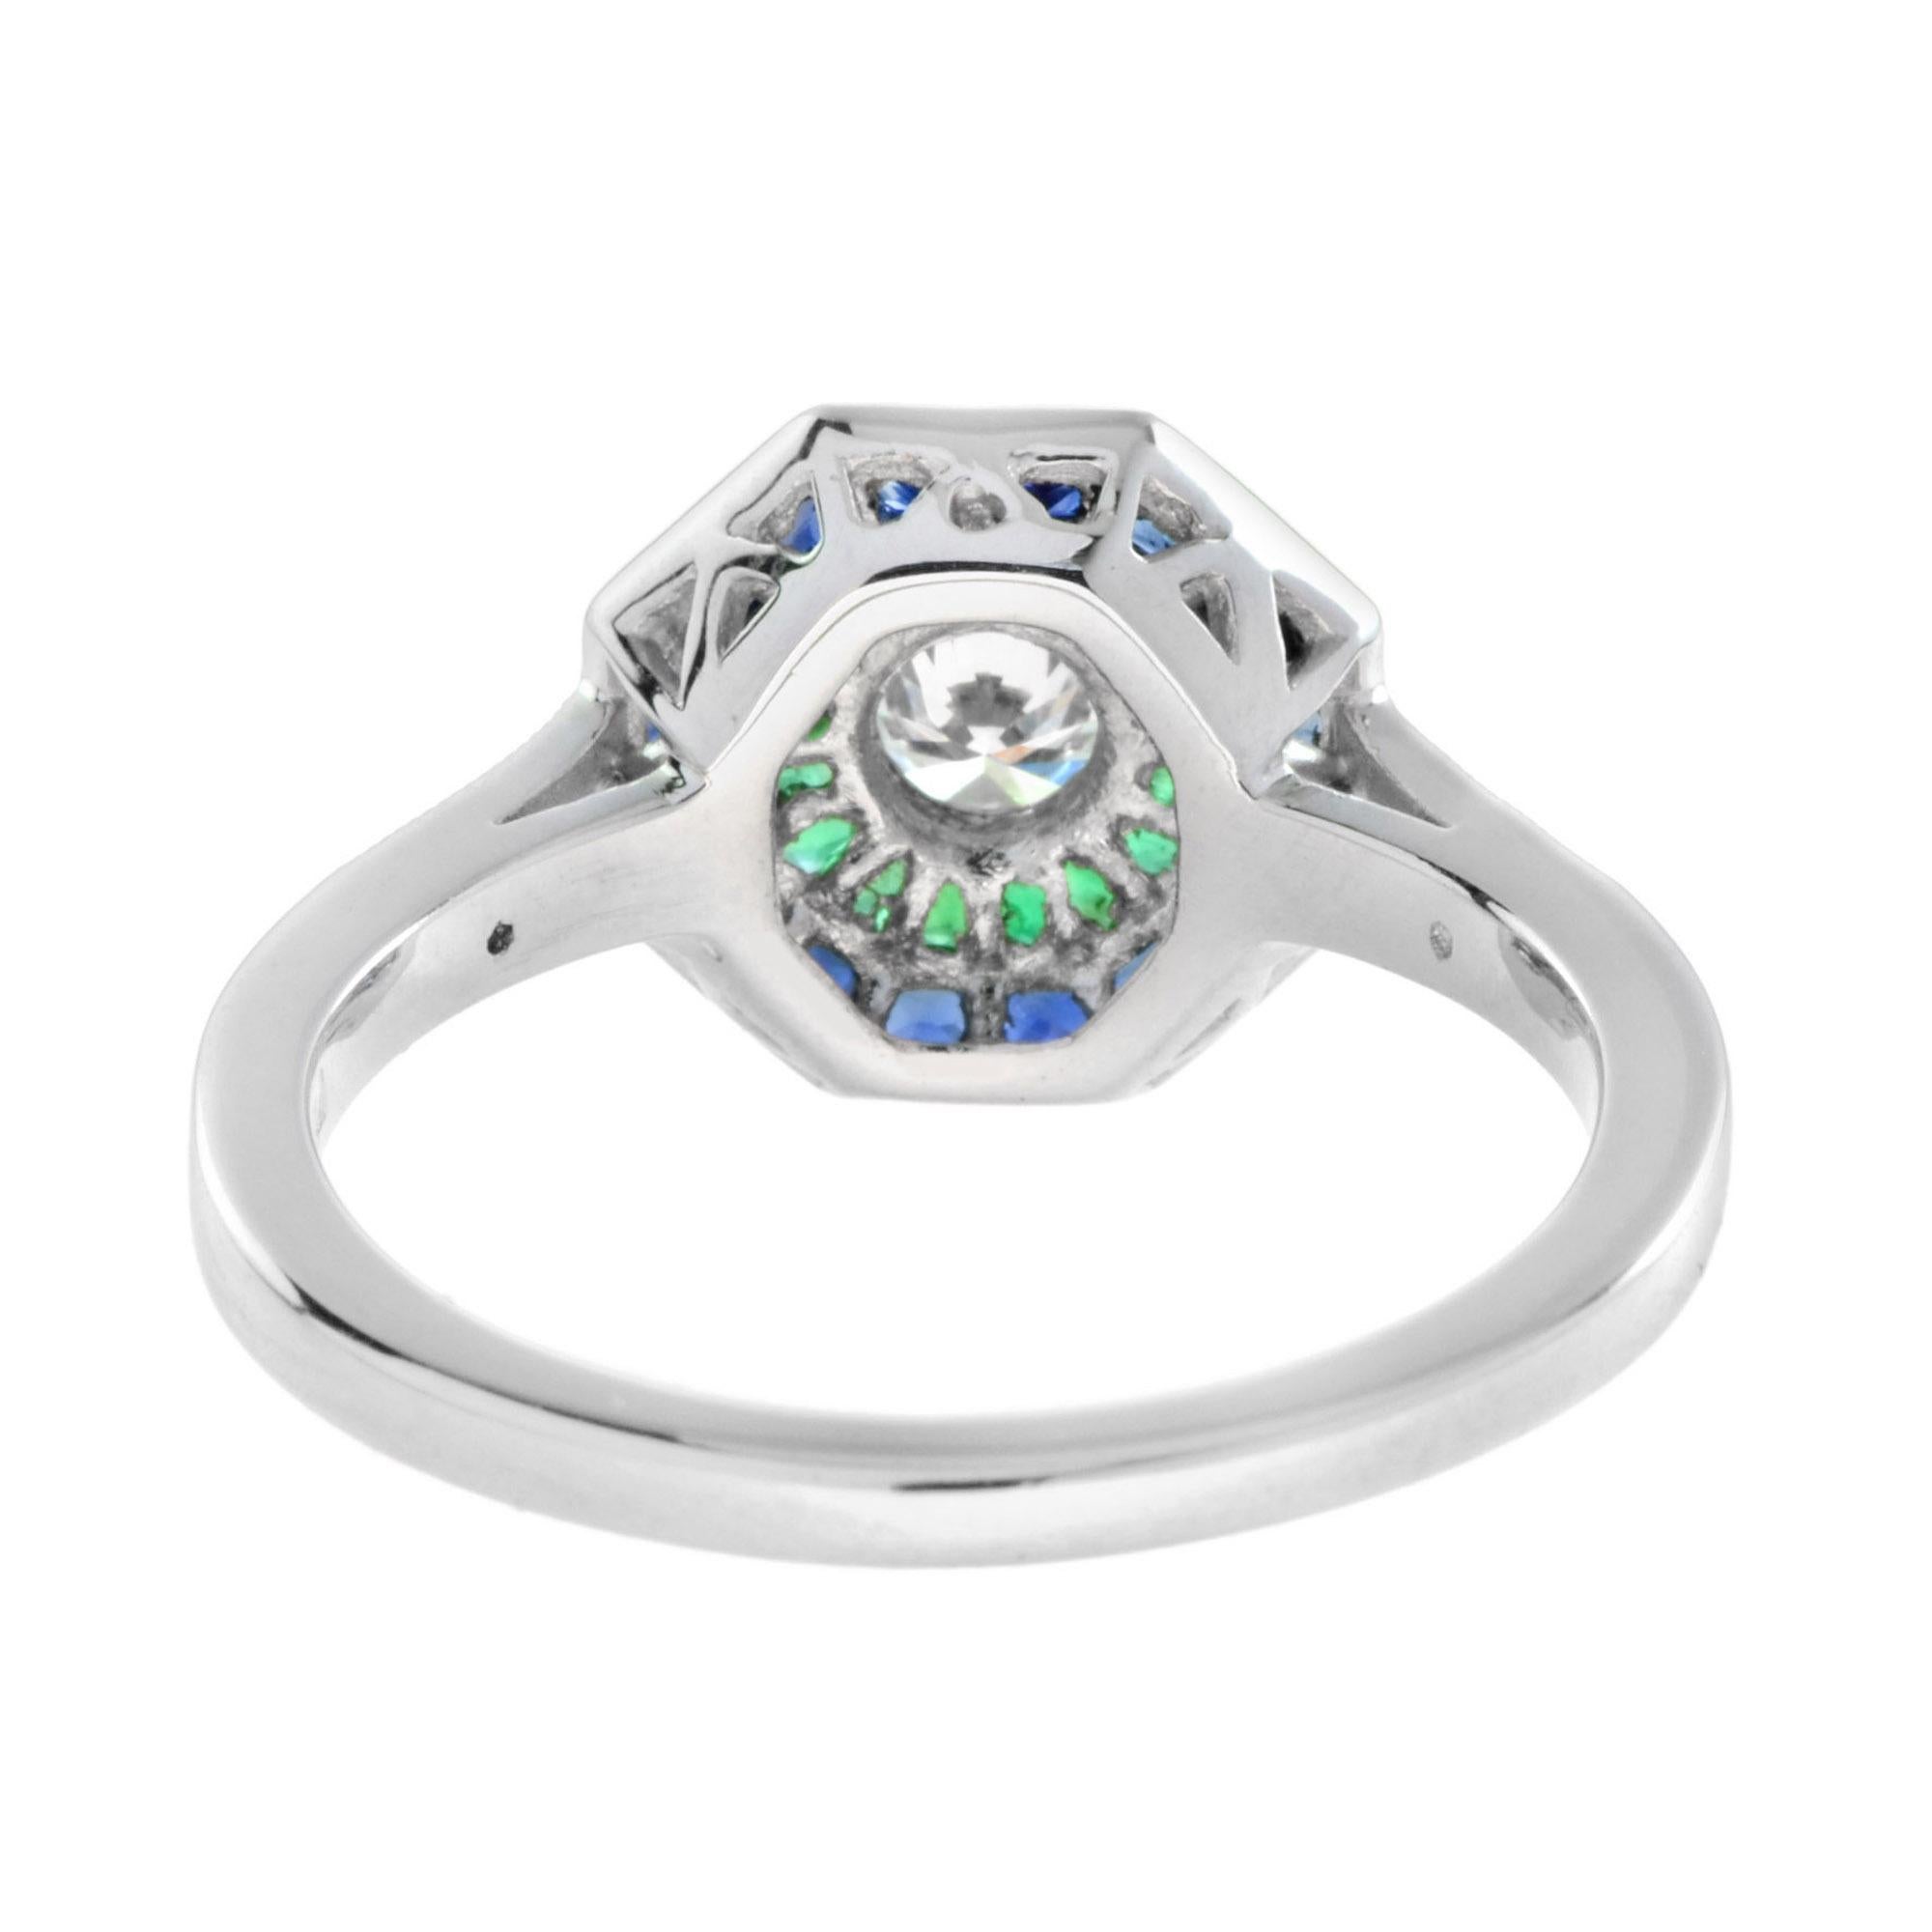 For Sale:  Diamond with Emerald and Sapphire Double Halo Ring in Platinum 5